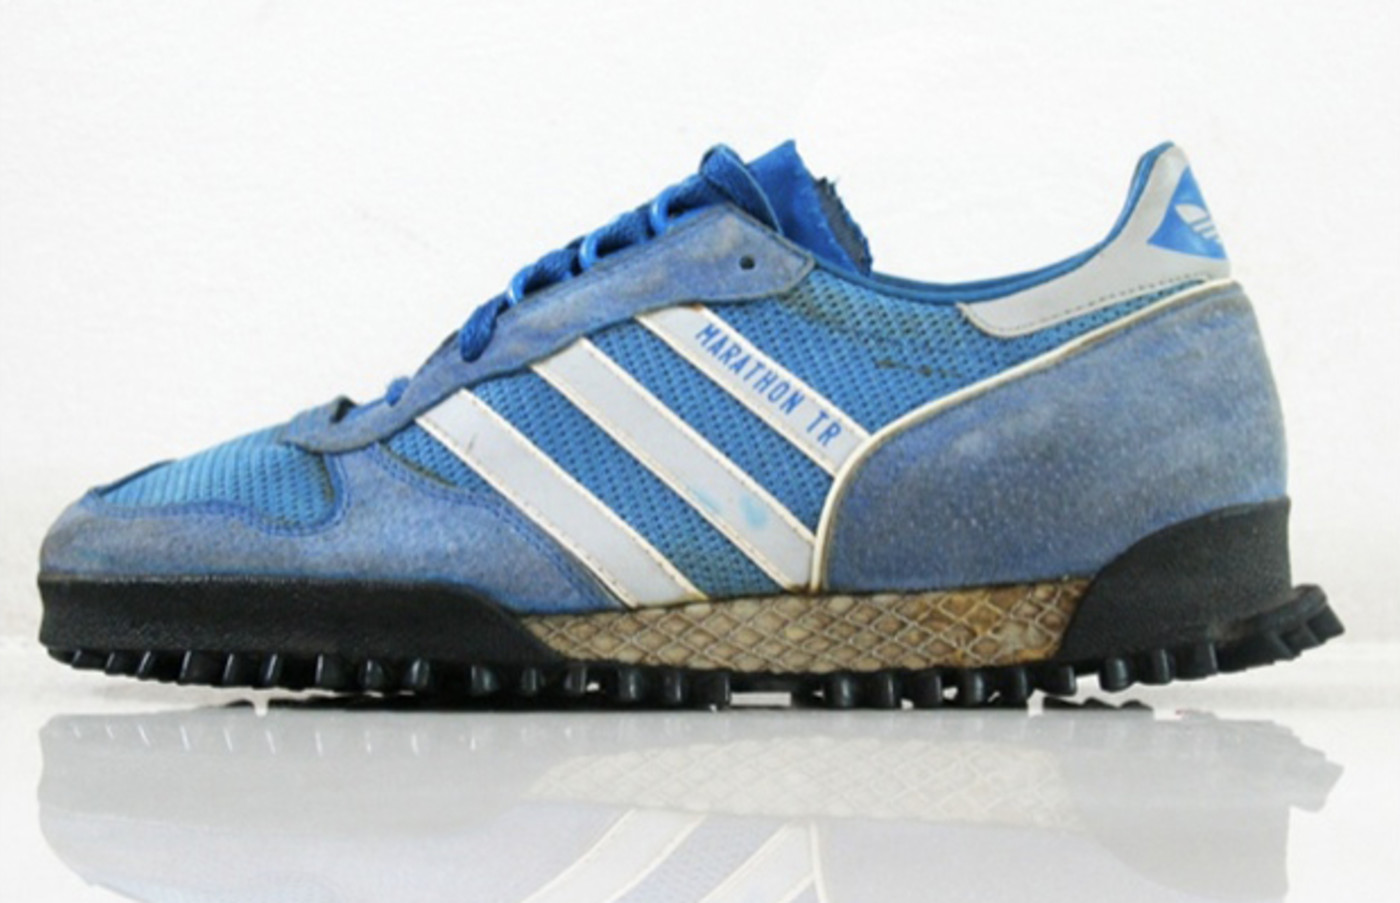 adidas 1980s shoes